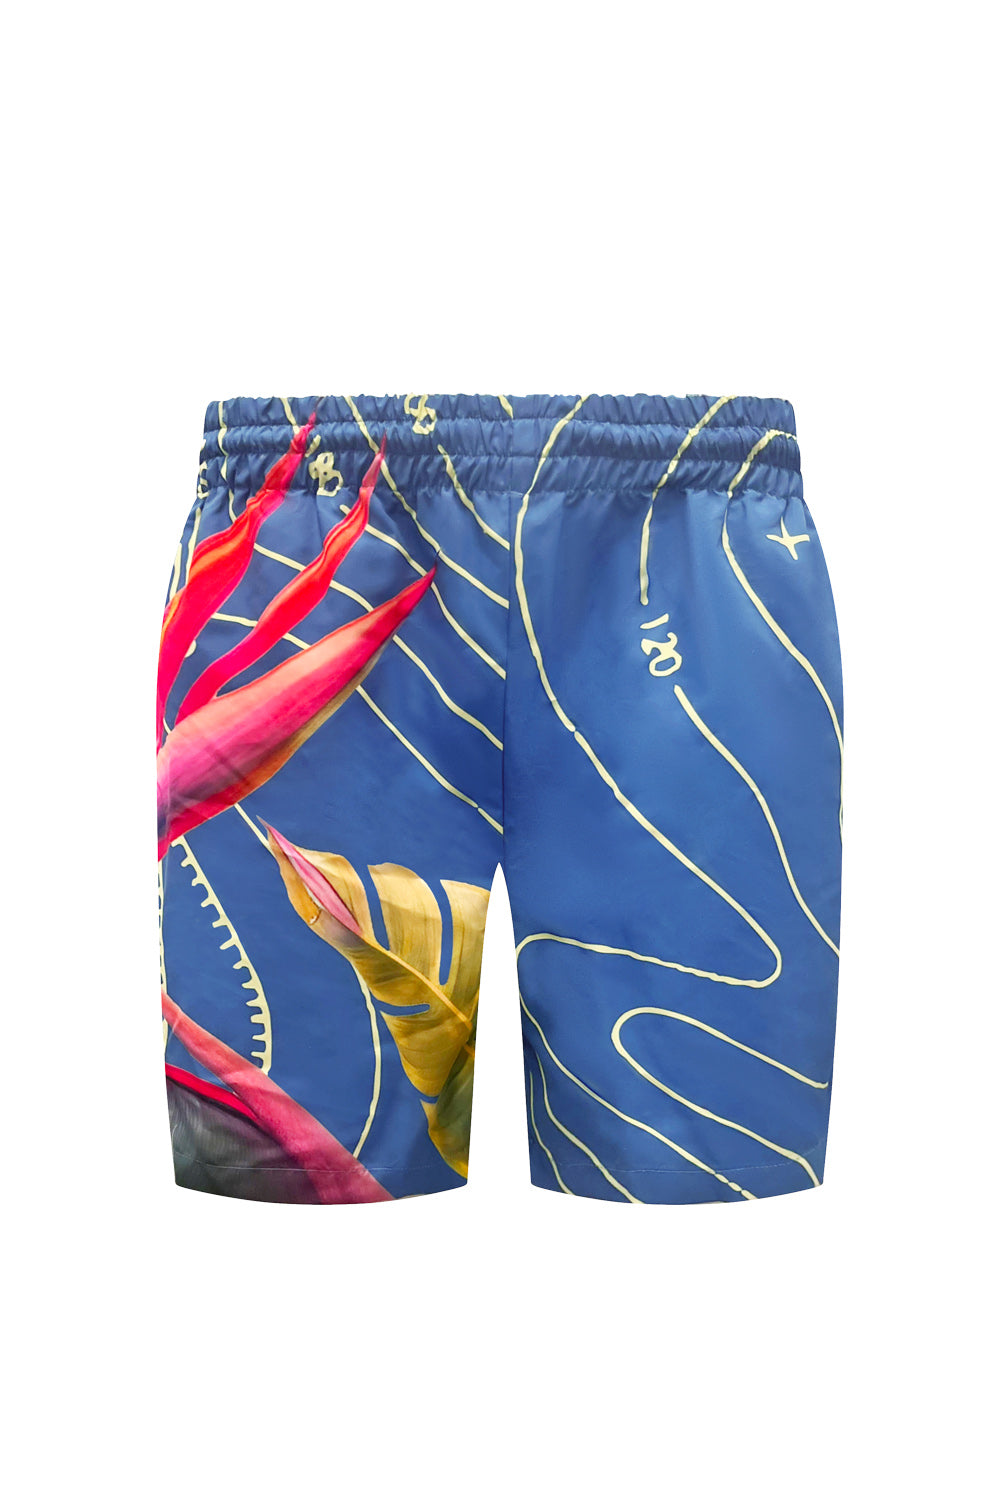 PARADISE RUGBY SHORTS (BLUE)